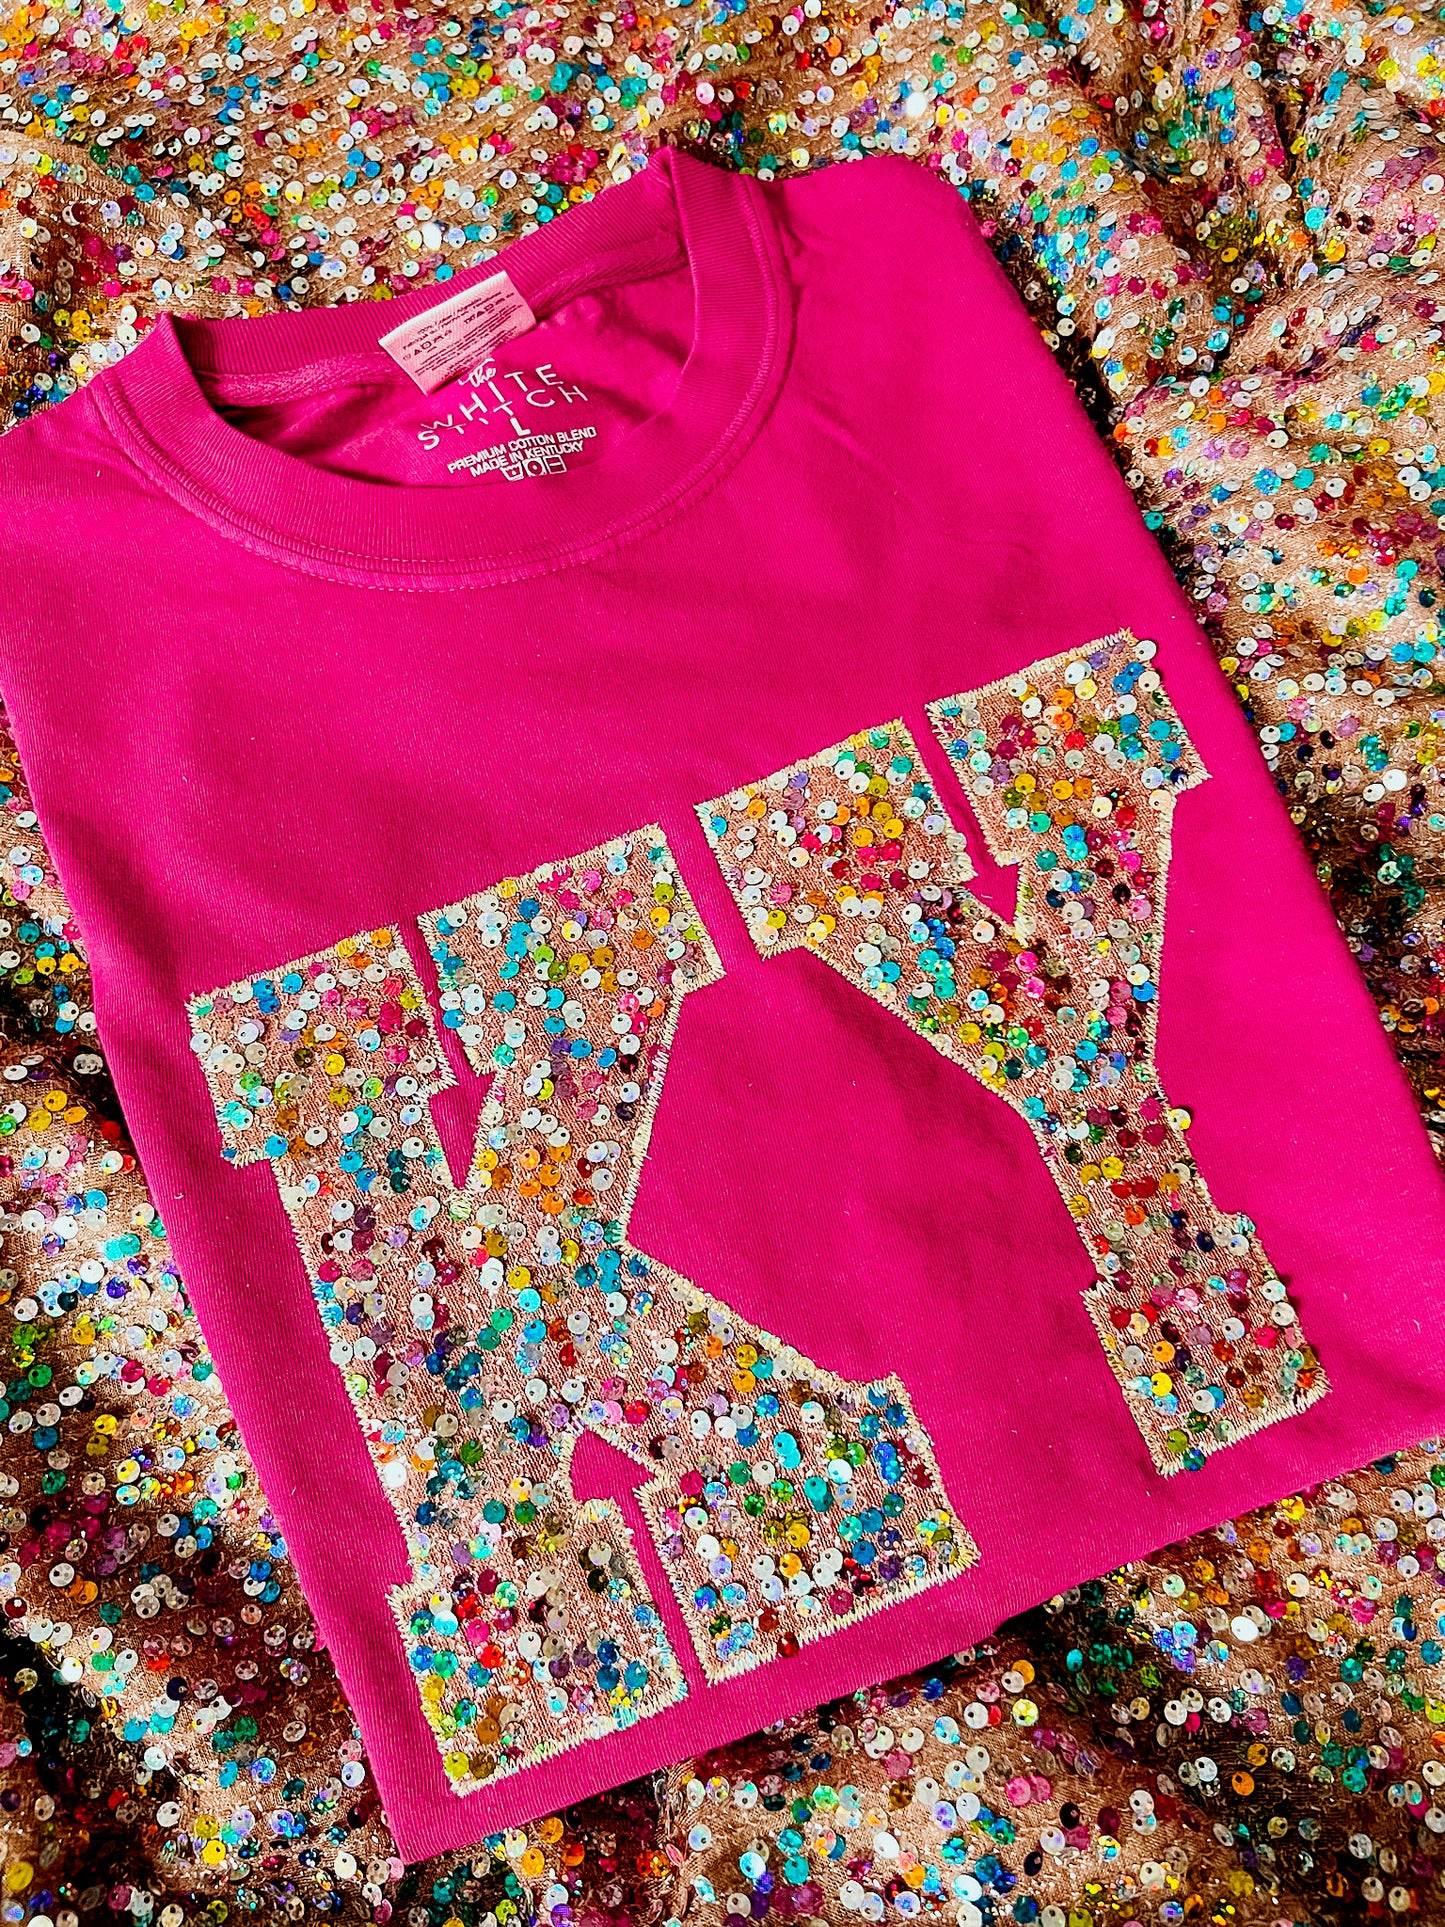 Statement Sequins State Tee | Customize Handmade | BERRY